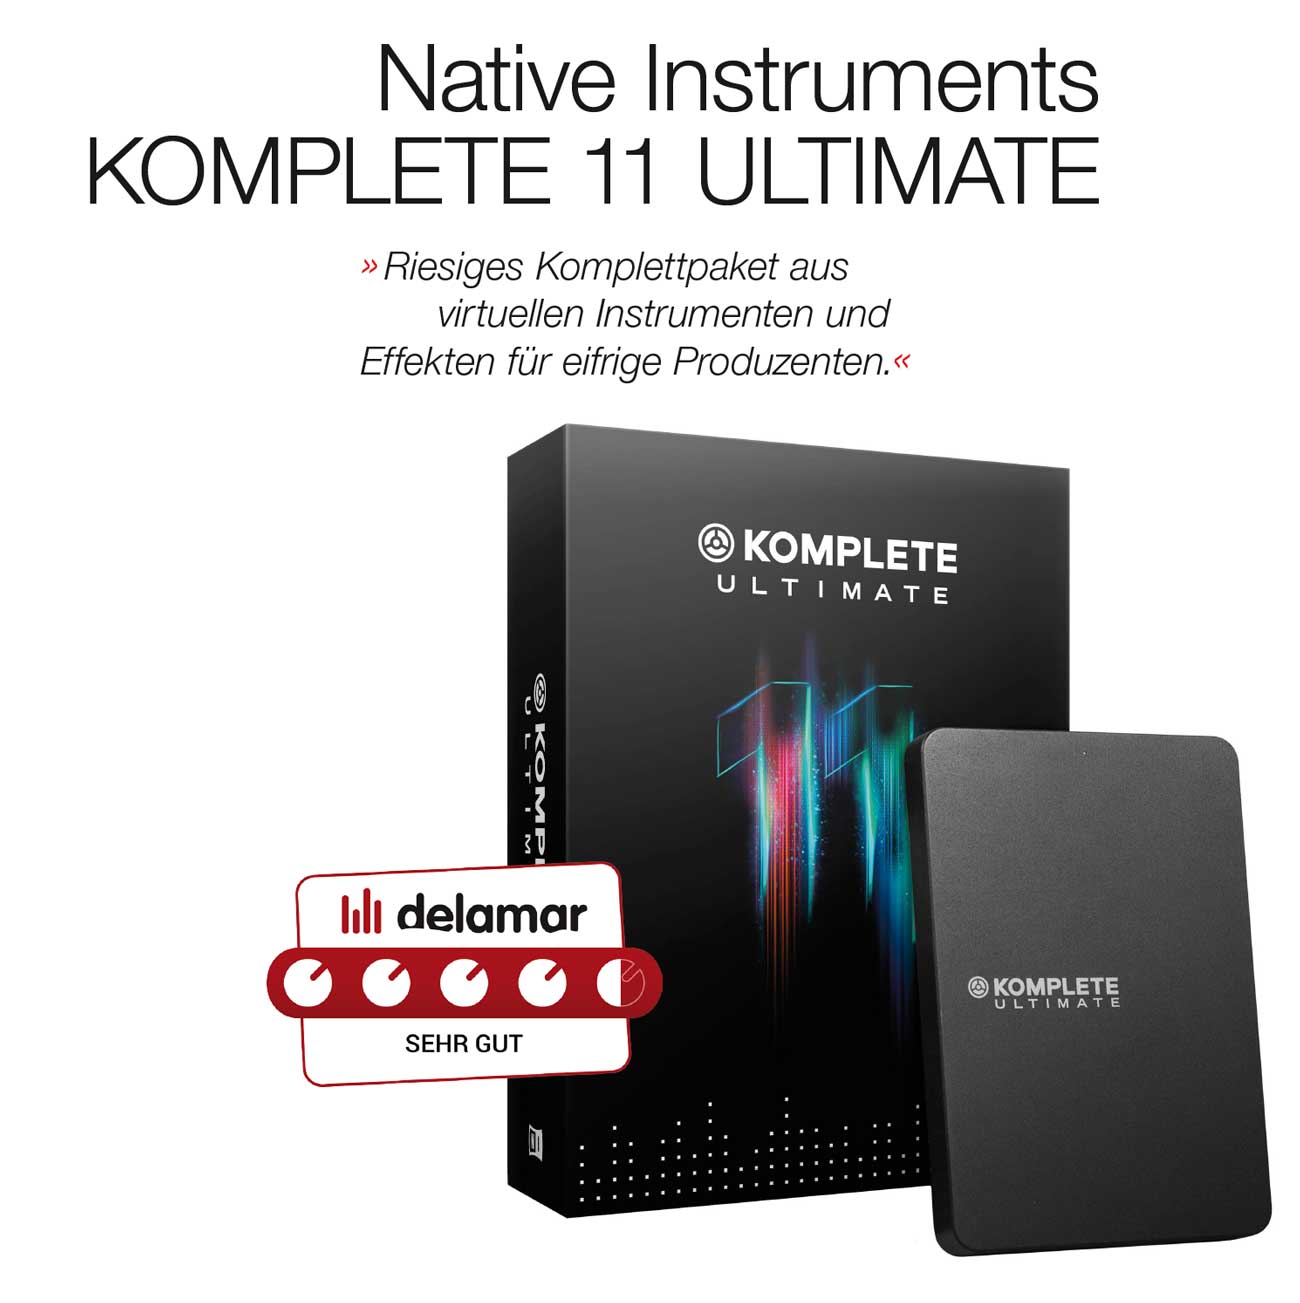 Native Instruments KOMPLETE 11 ULTIMATE | MUSIC STORE professional